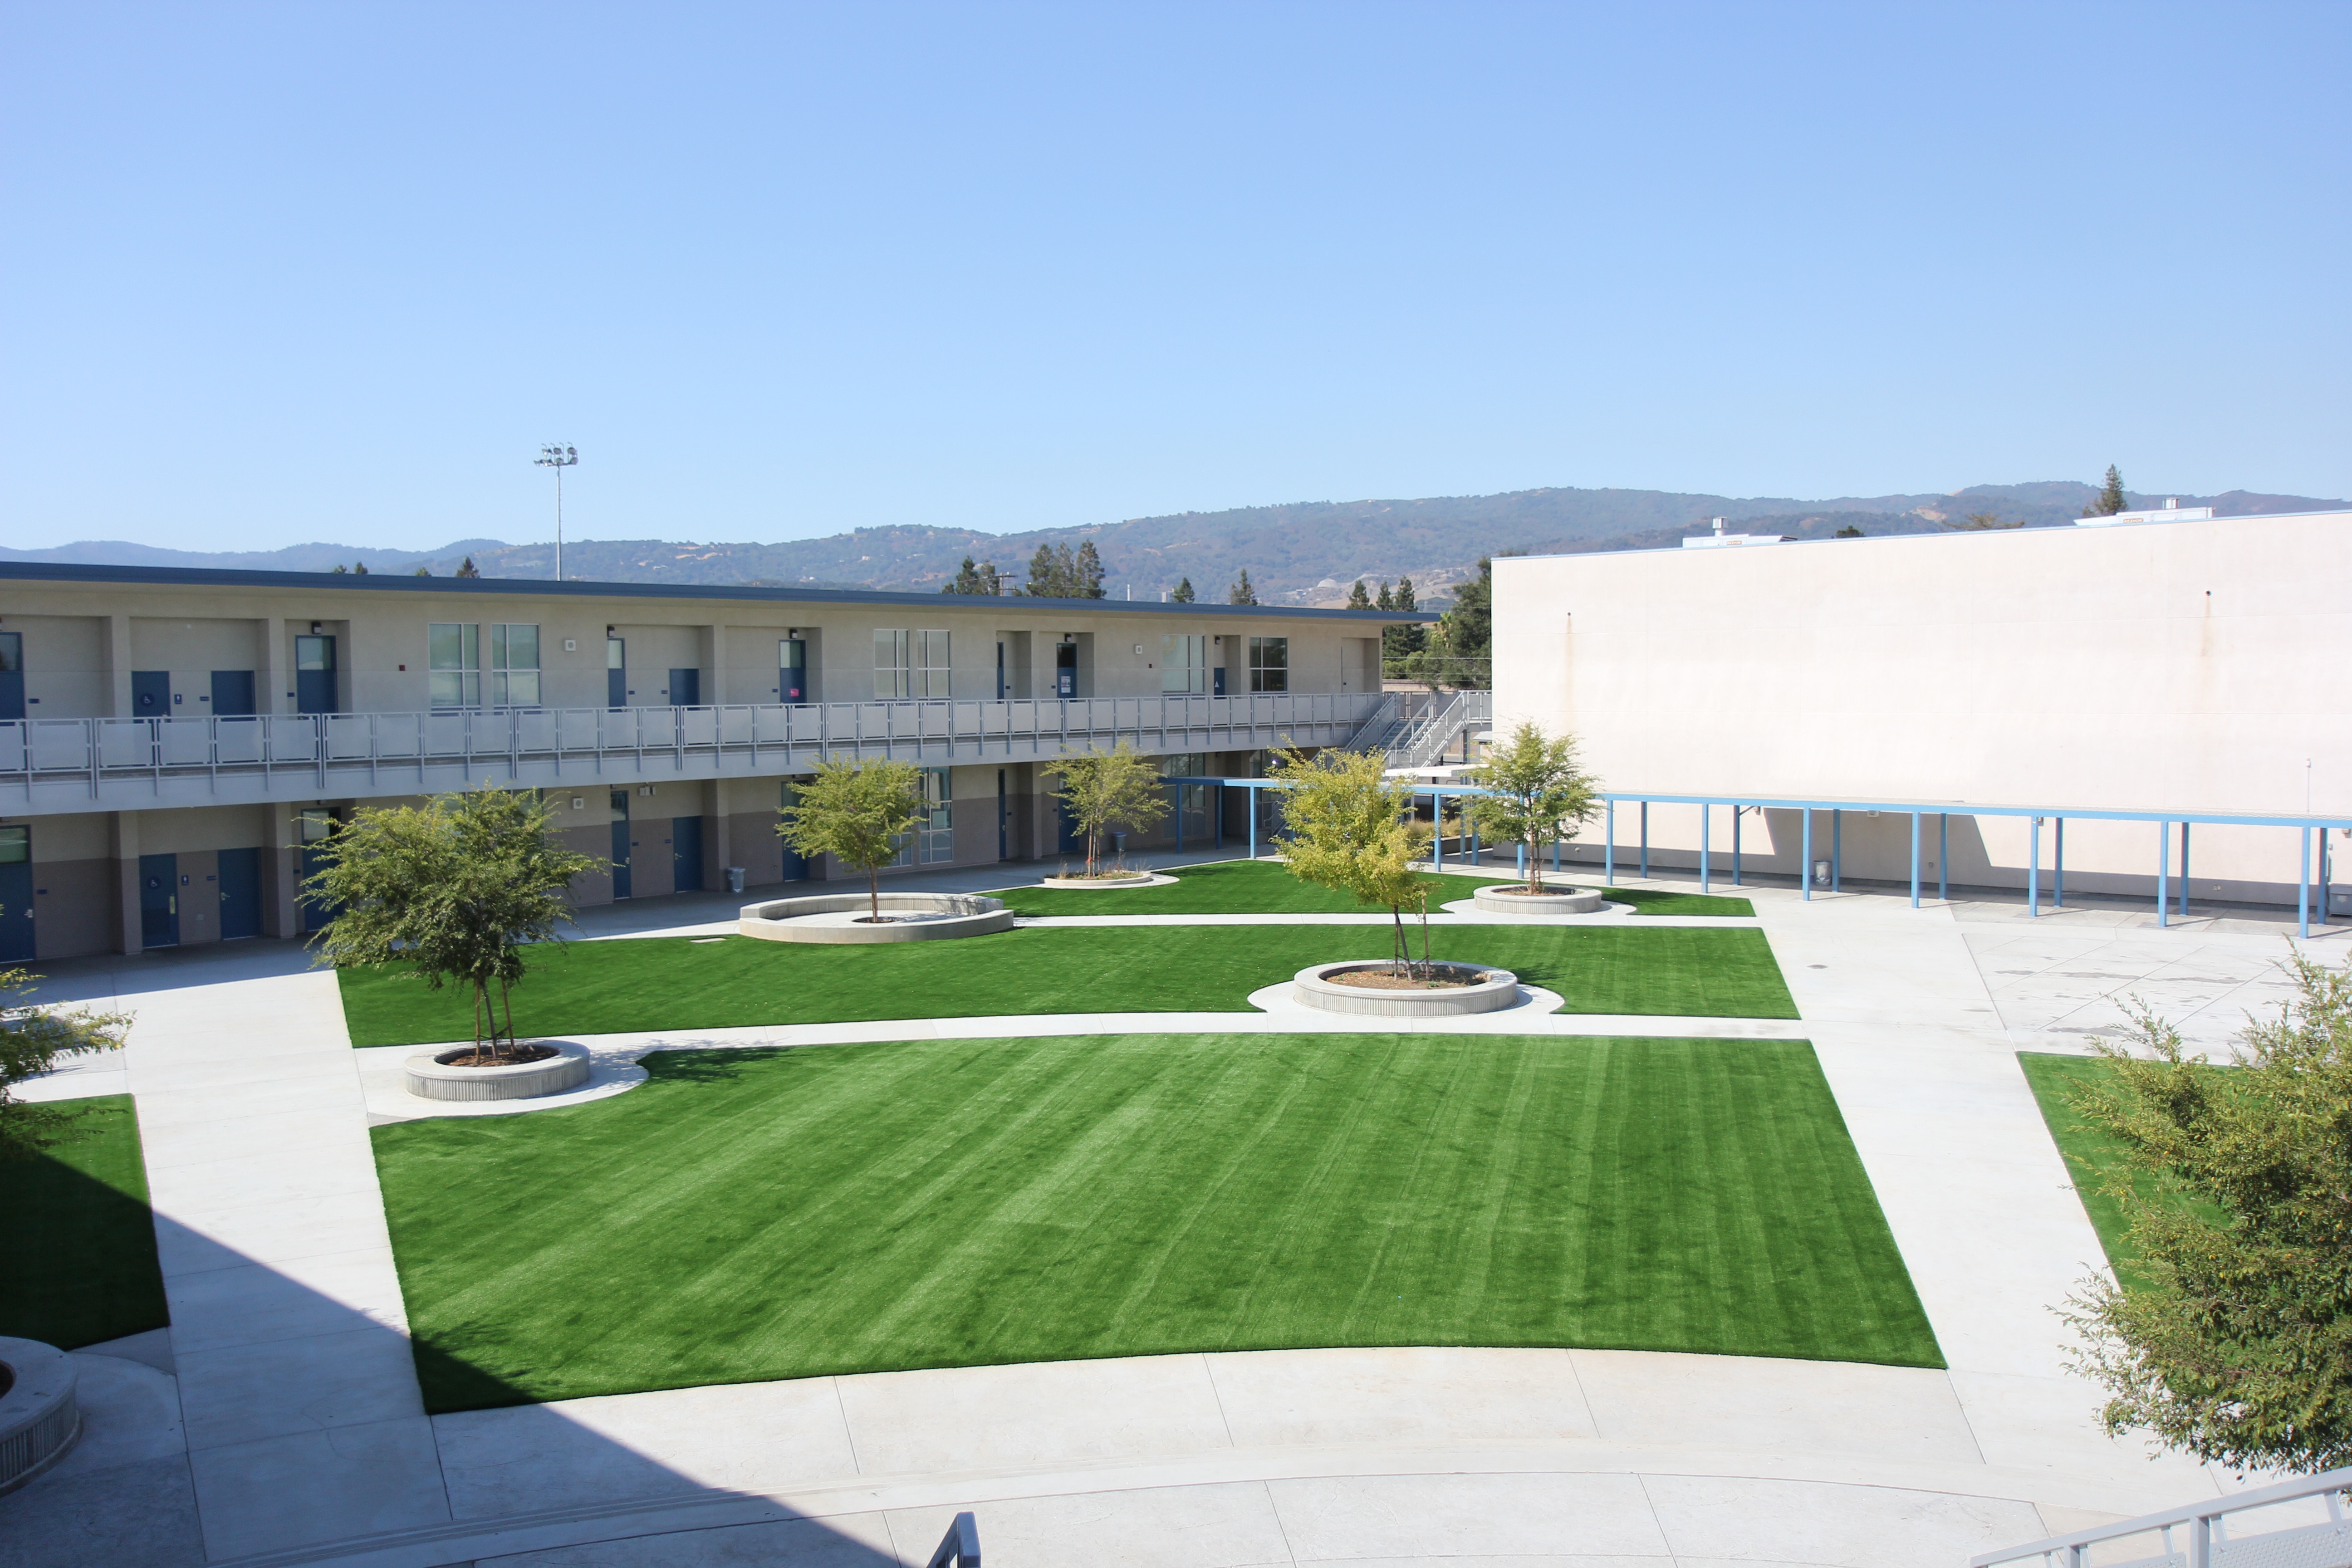 cupertino middle